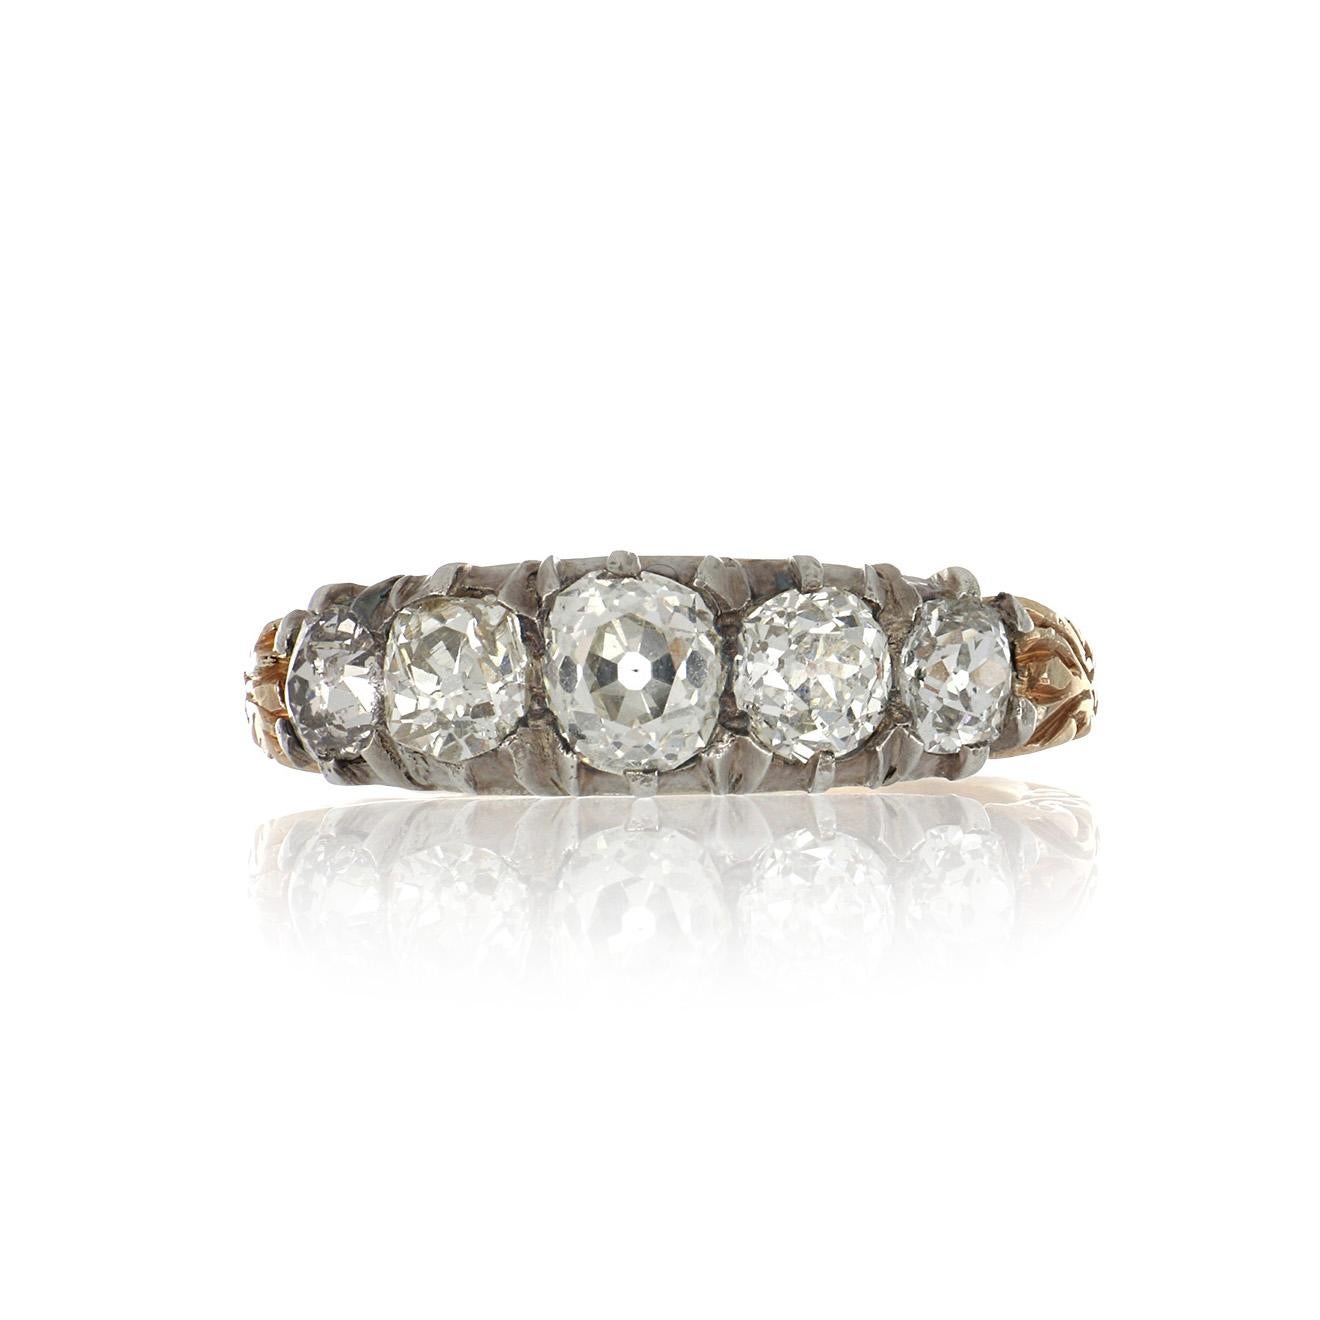 Victorian 18K yellow gold and sterling silver Old Mine-cut diamond graduated five stone half hoop ring, with decorative shoulders. Circa 1880.  The ring contains five Old Mine-cut diamonds that total 1.72 carats, J-L color and VS2-SI2 clarity.  Ring